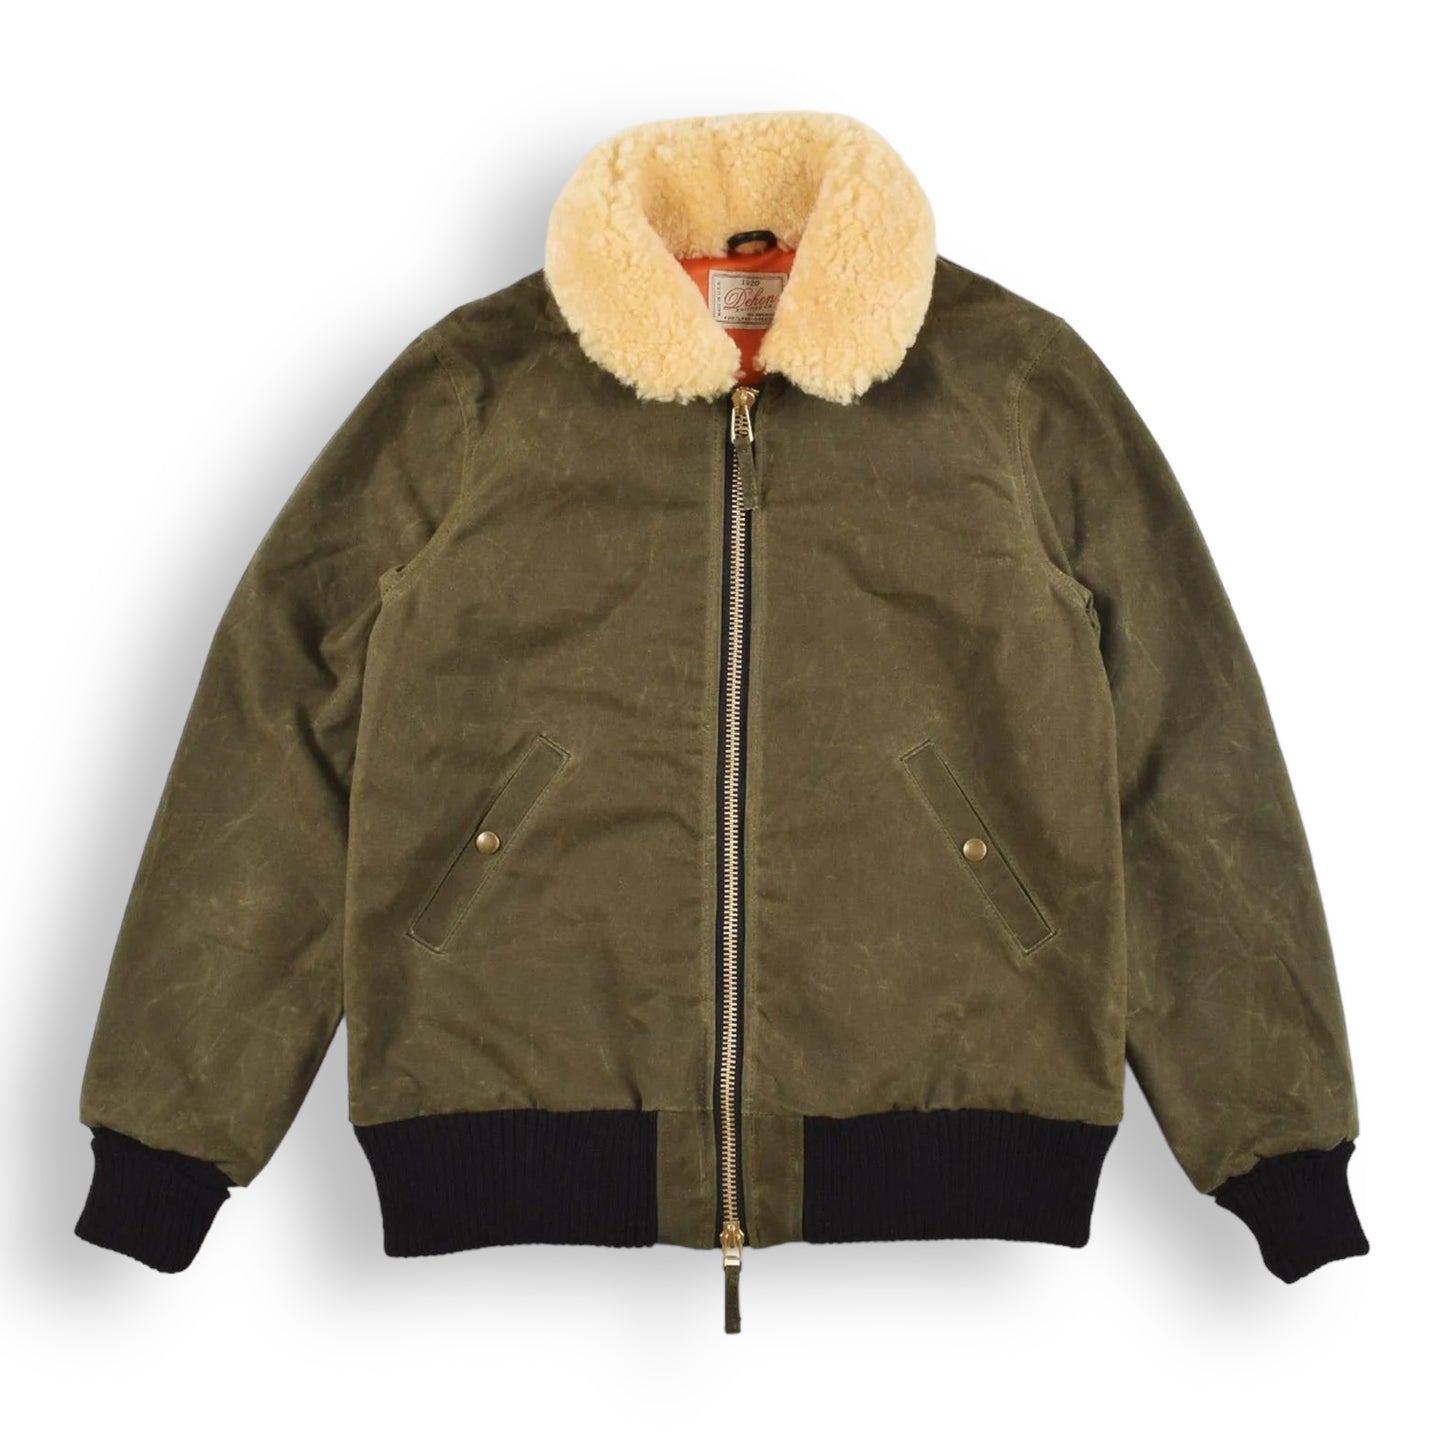 Flyer´s Club Jacket Loden Wax / Gold Mouton